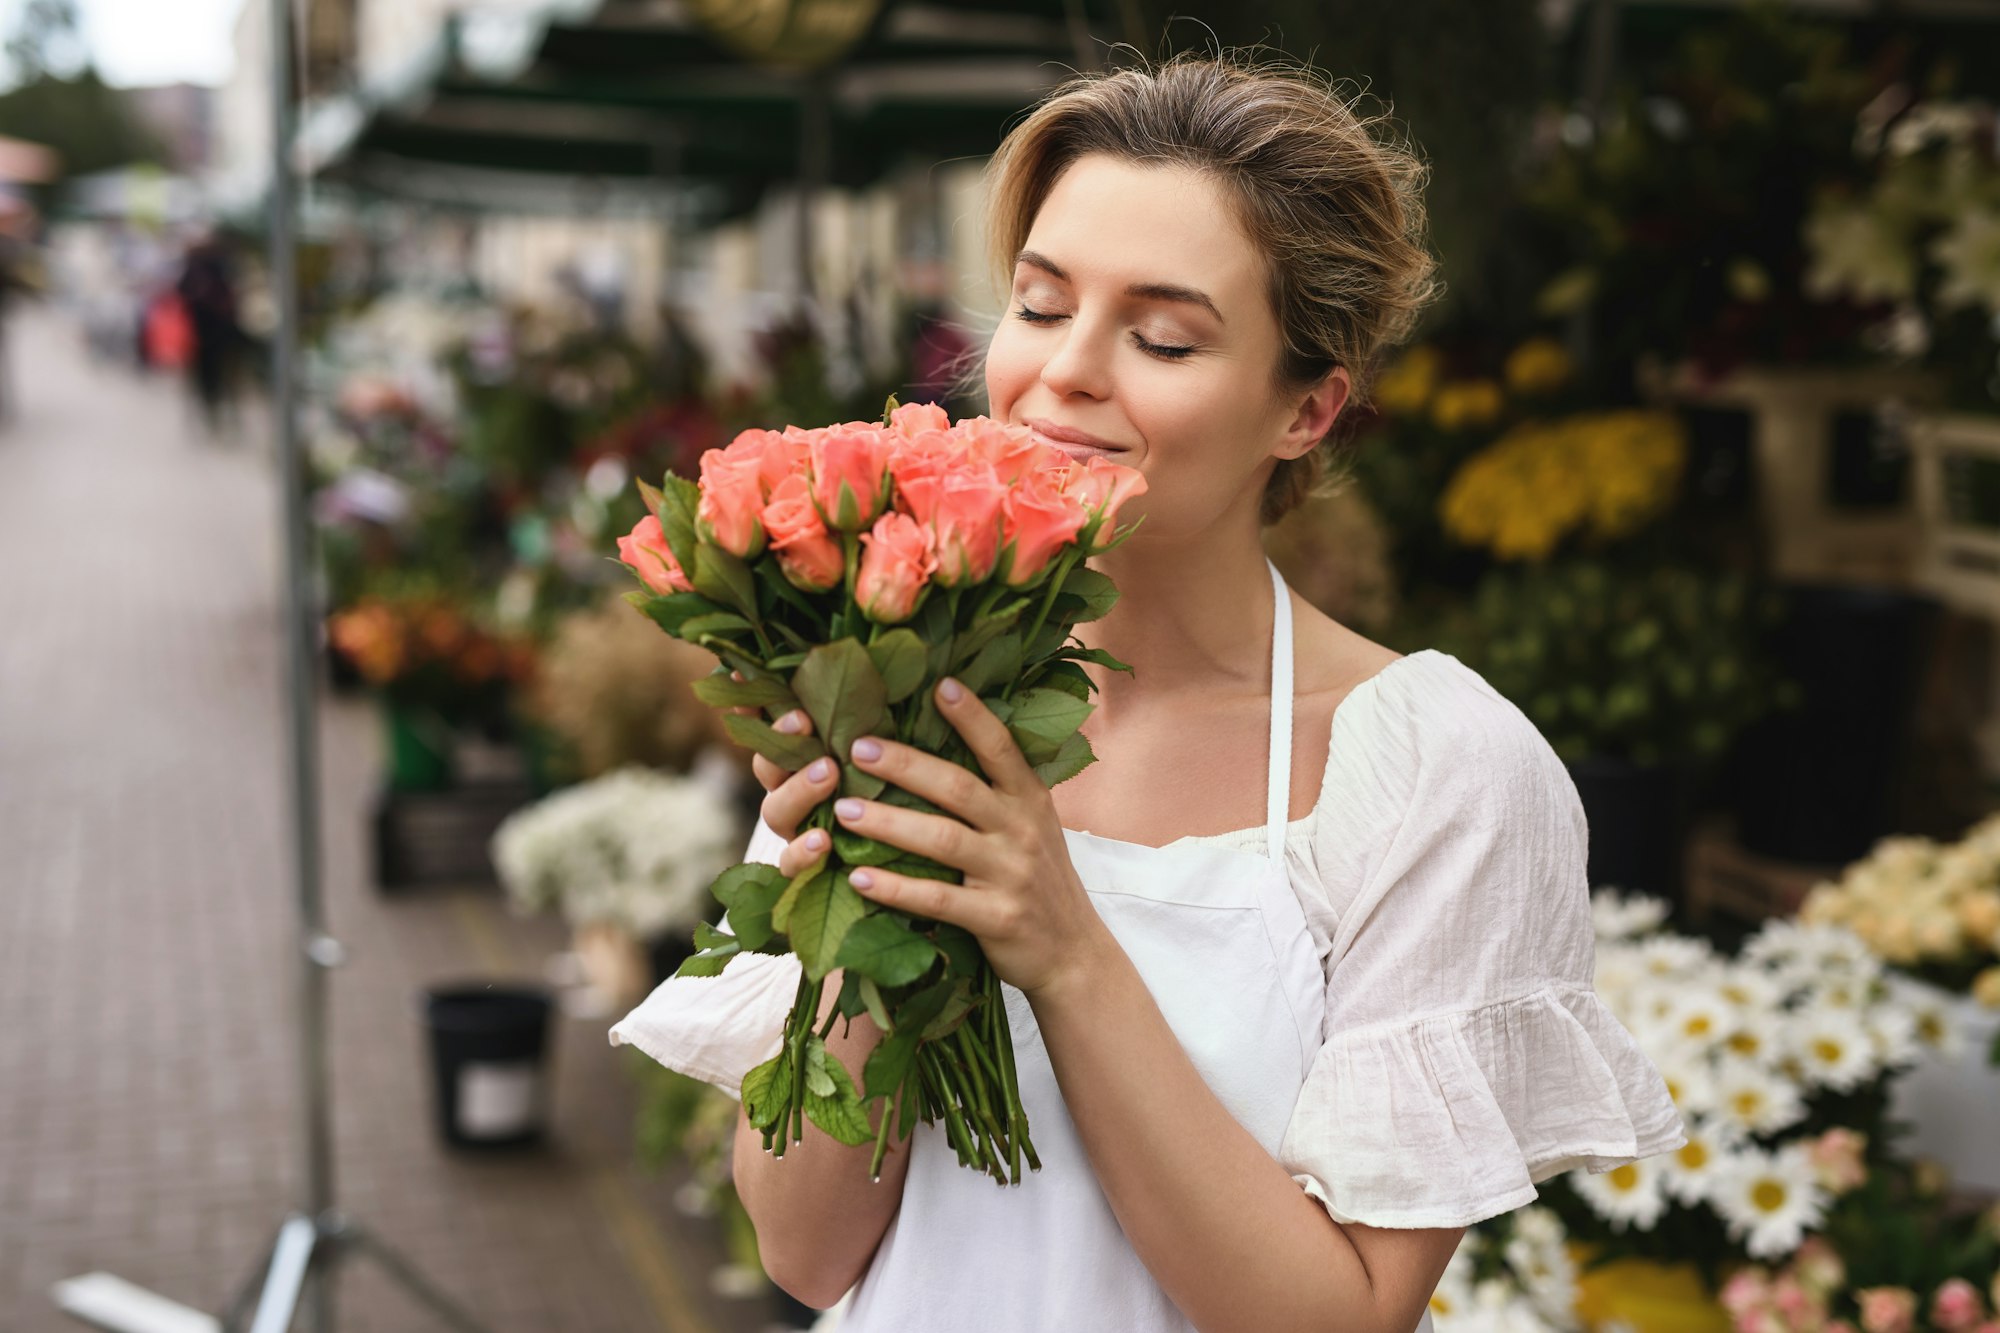 Woman florist with a heap of rose flowers in her little flower shop